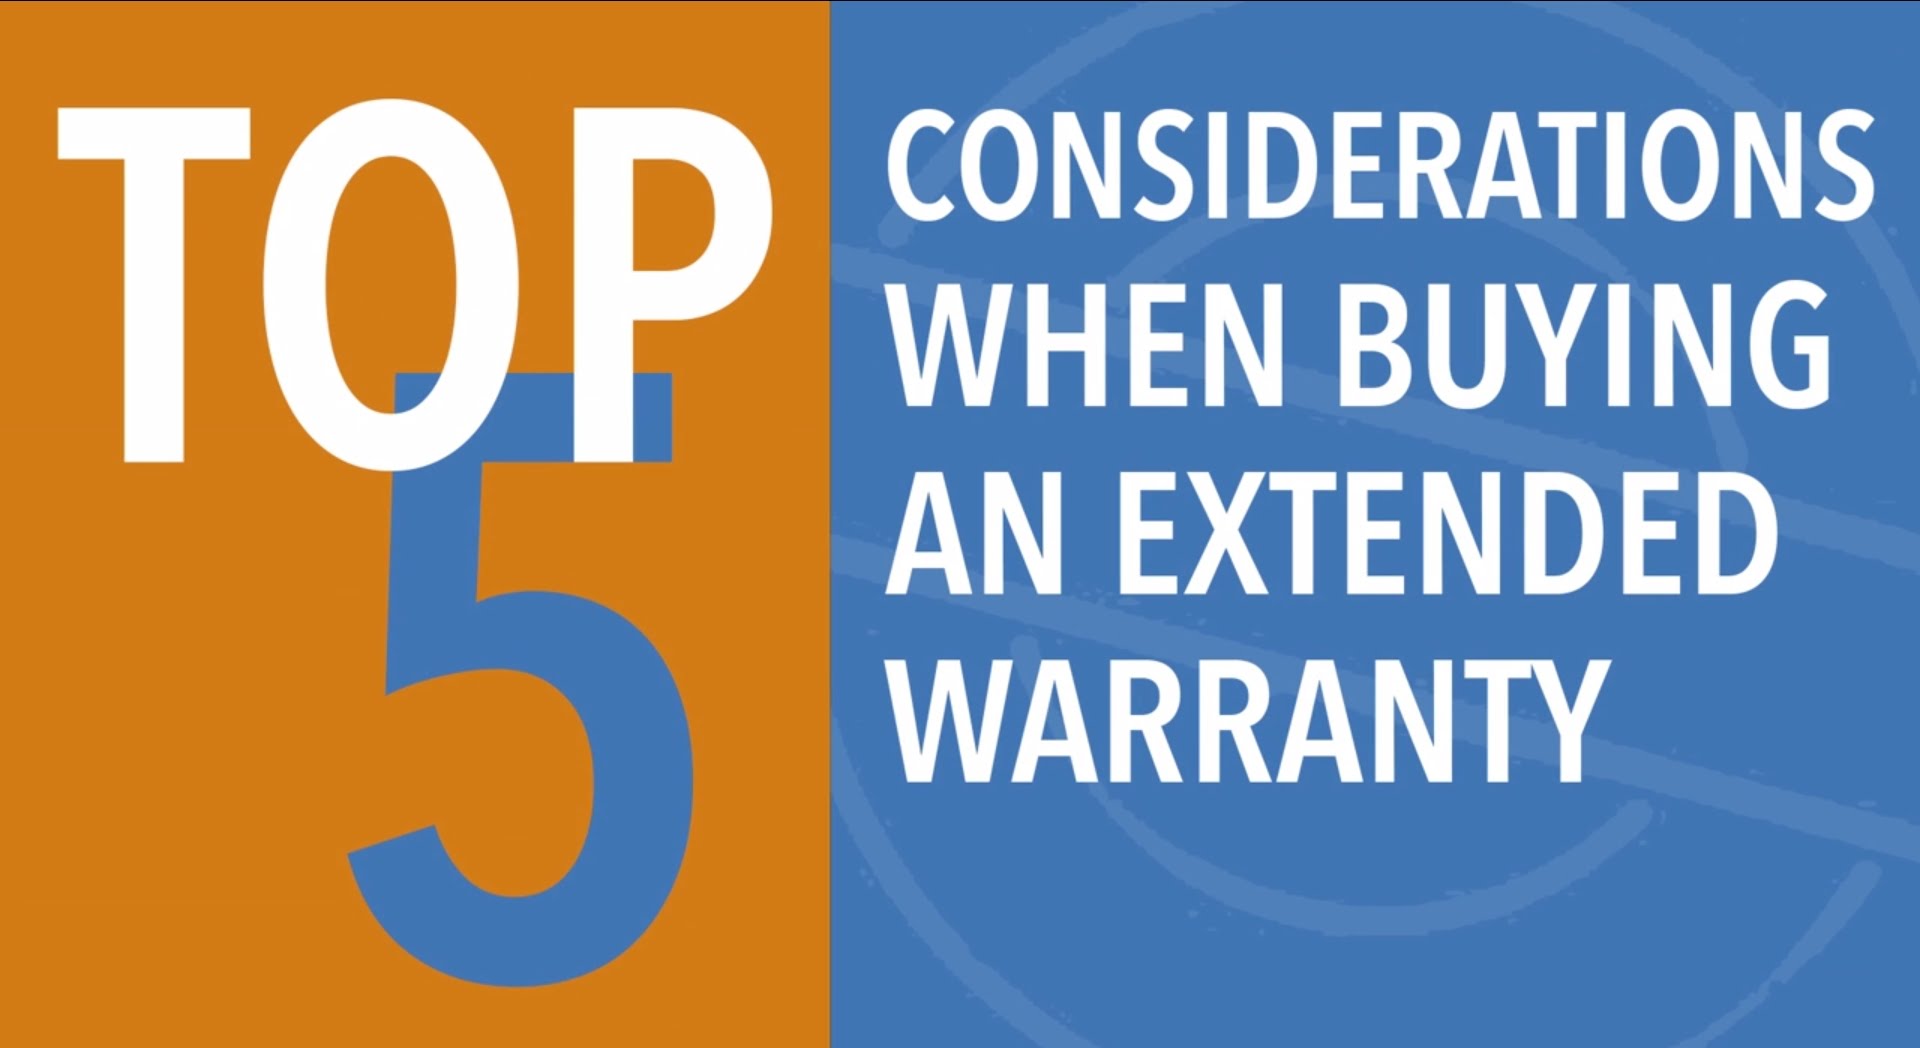 is it worth buying extended warranty on used car